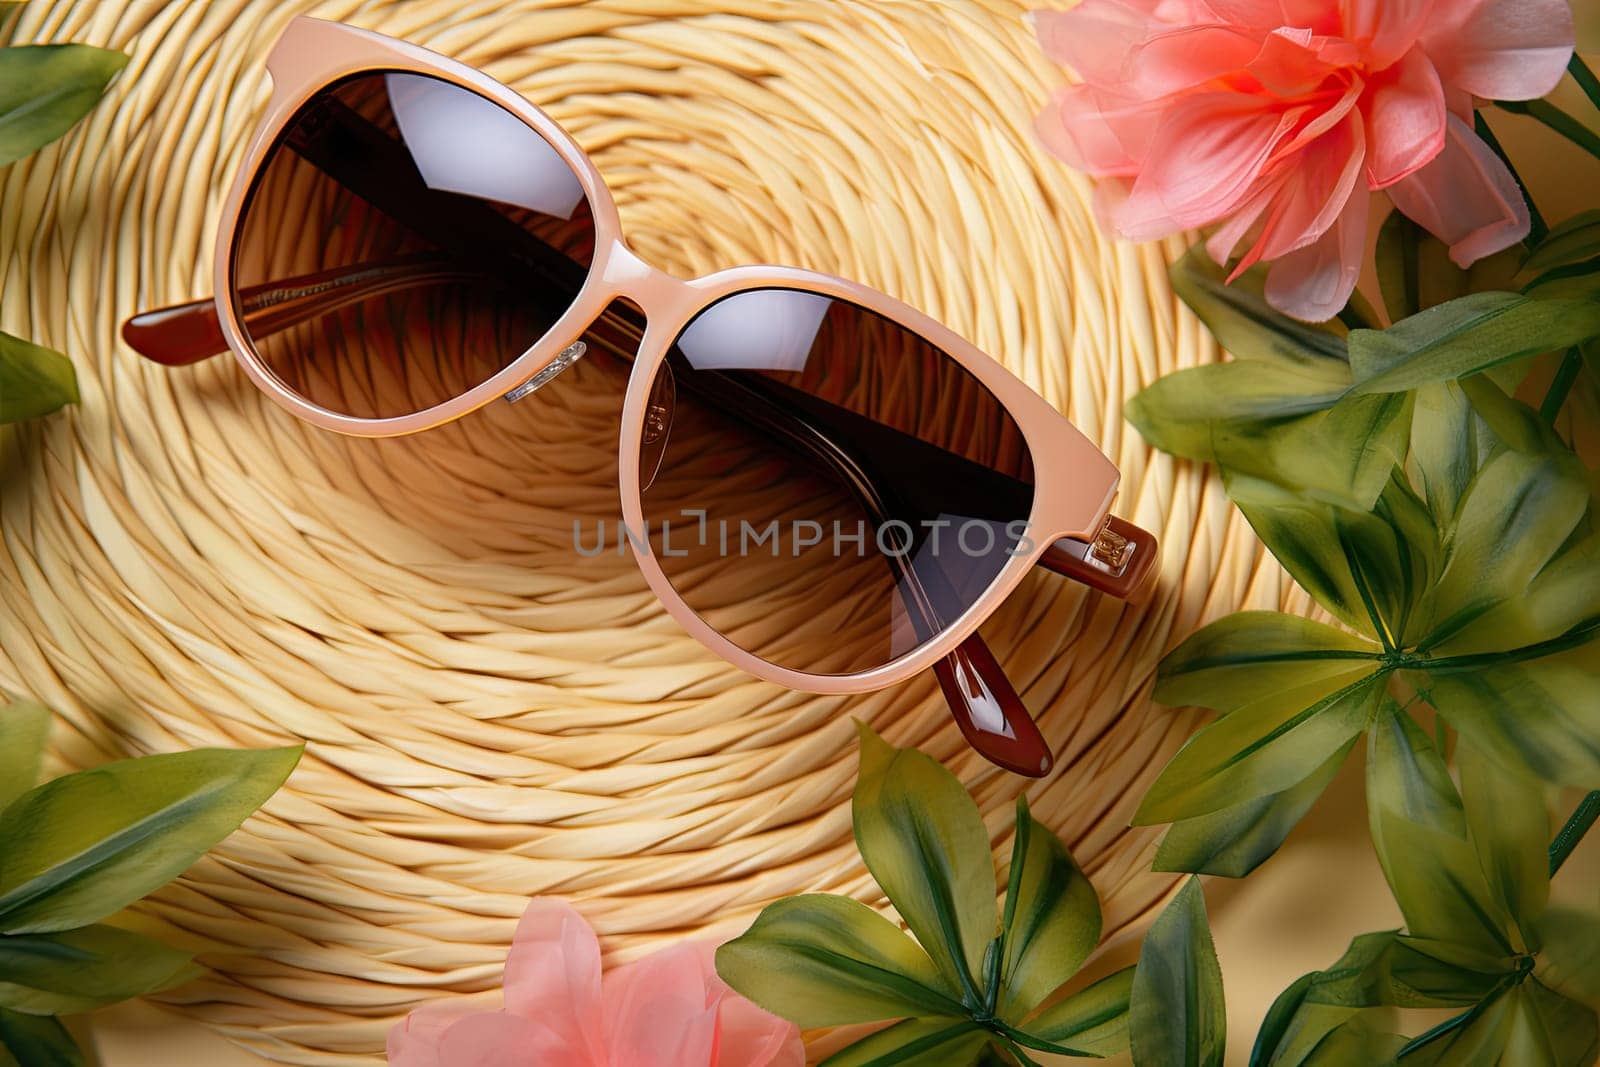 A Stylish Pair of Sunglasses Resting on a Rustic Woven Basket